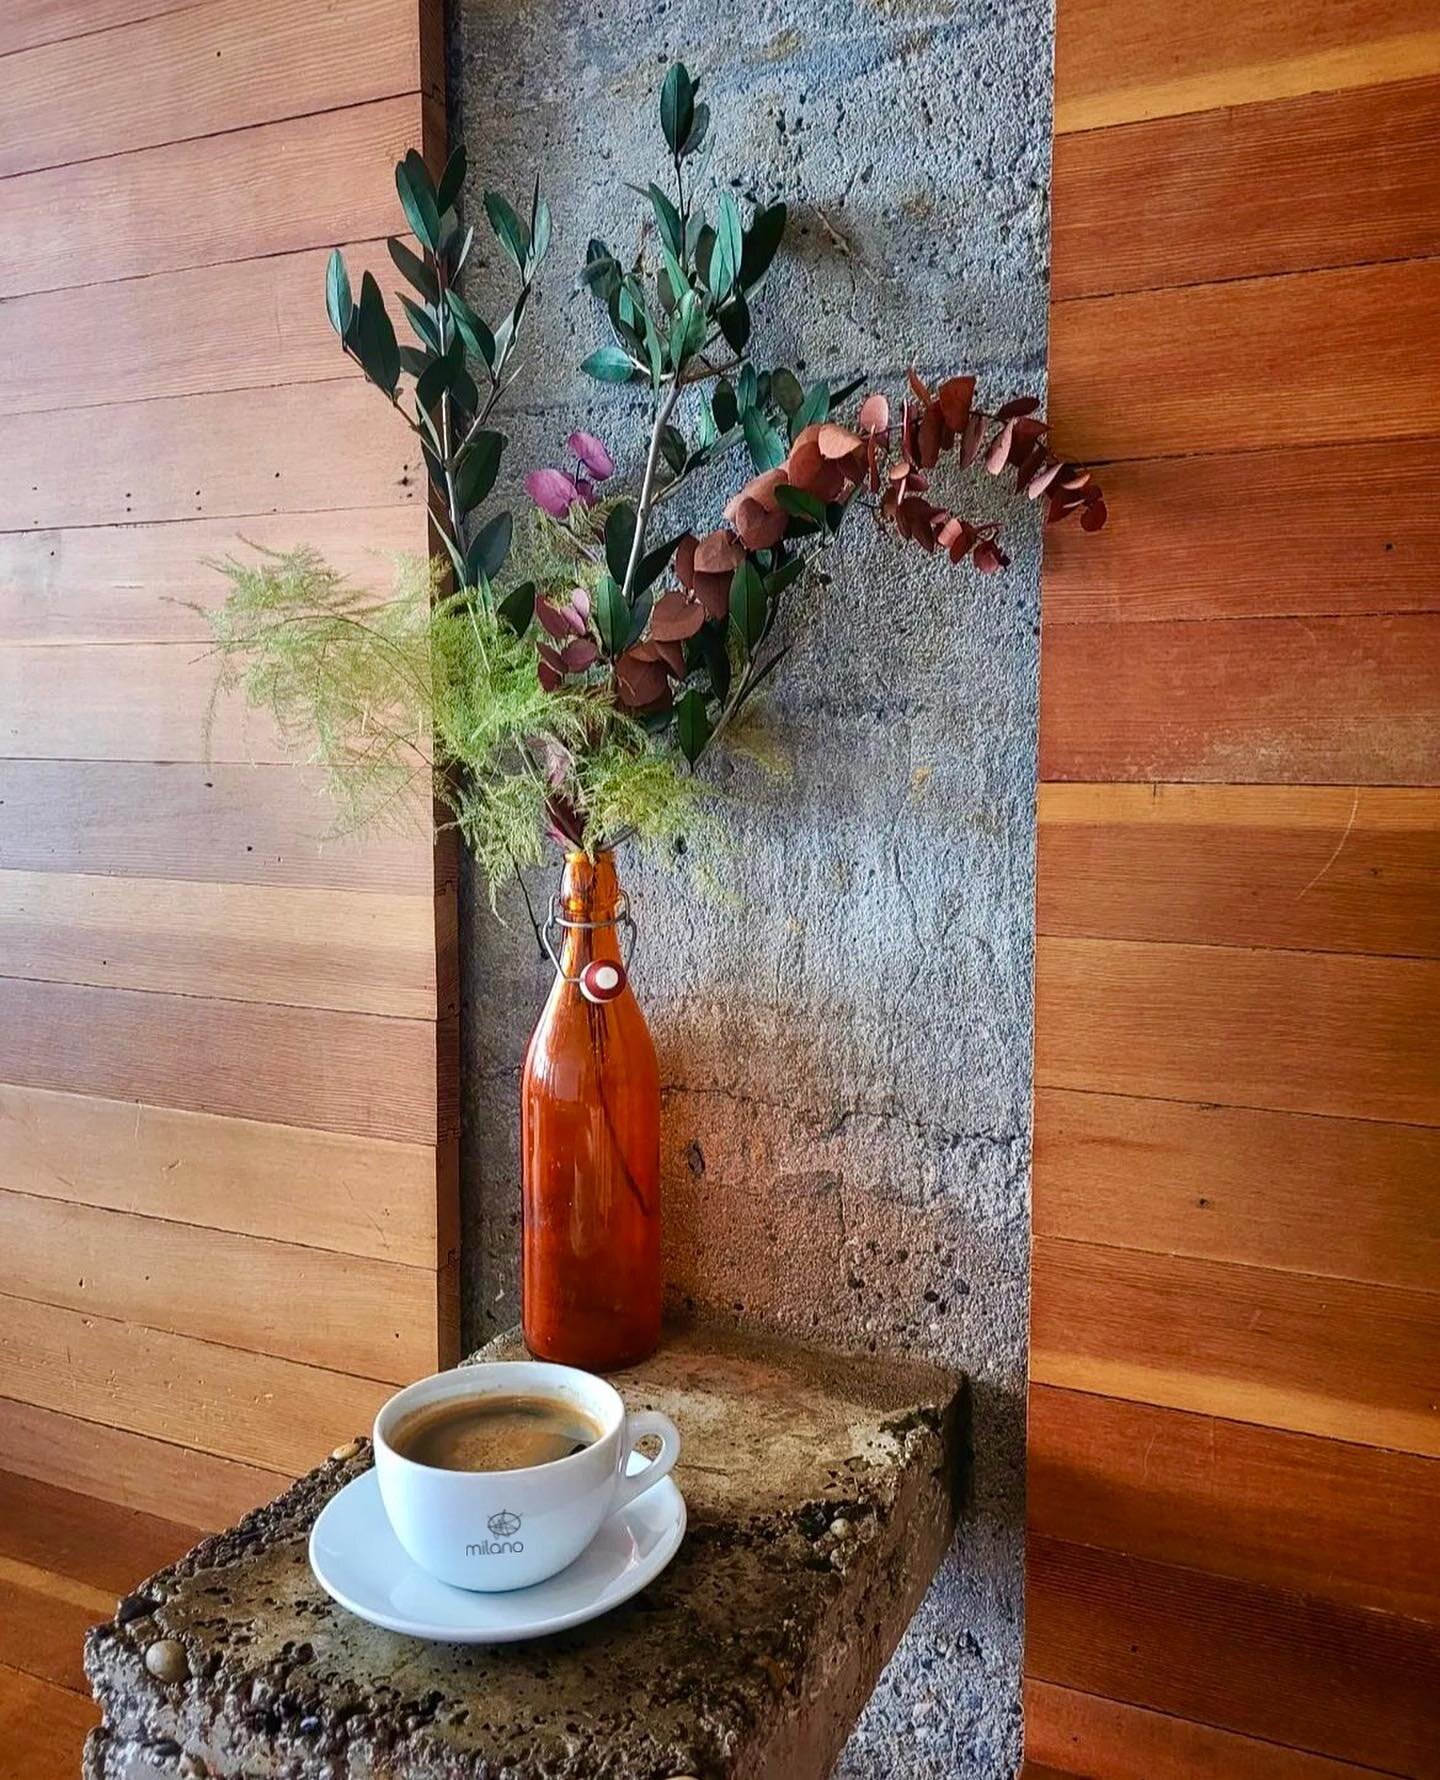 Nothing like an afternoon Americano at our Gastown location. ✨

.
.
.

📷: @emiliejolie 

#milanoroasters #milanocoffee #localroasters #milanogastown #yvrcoffee